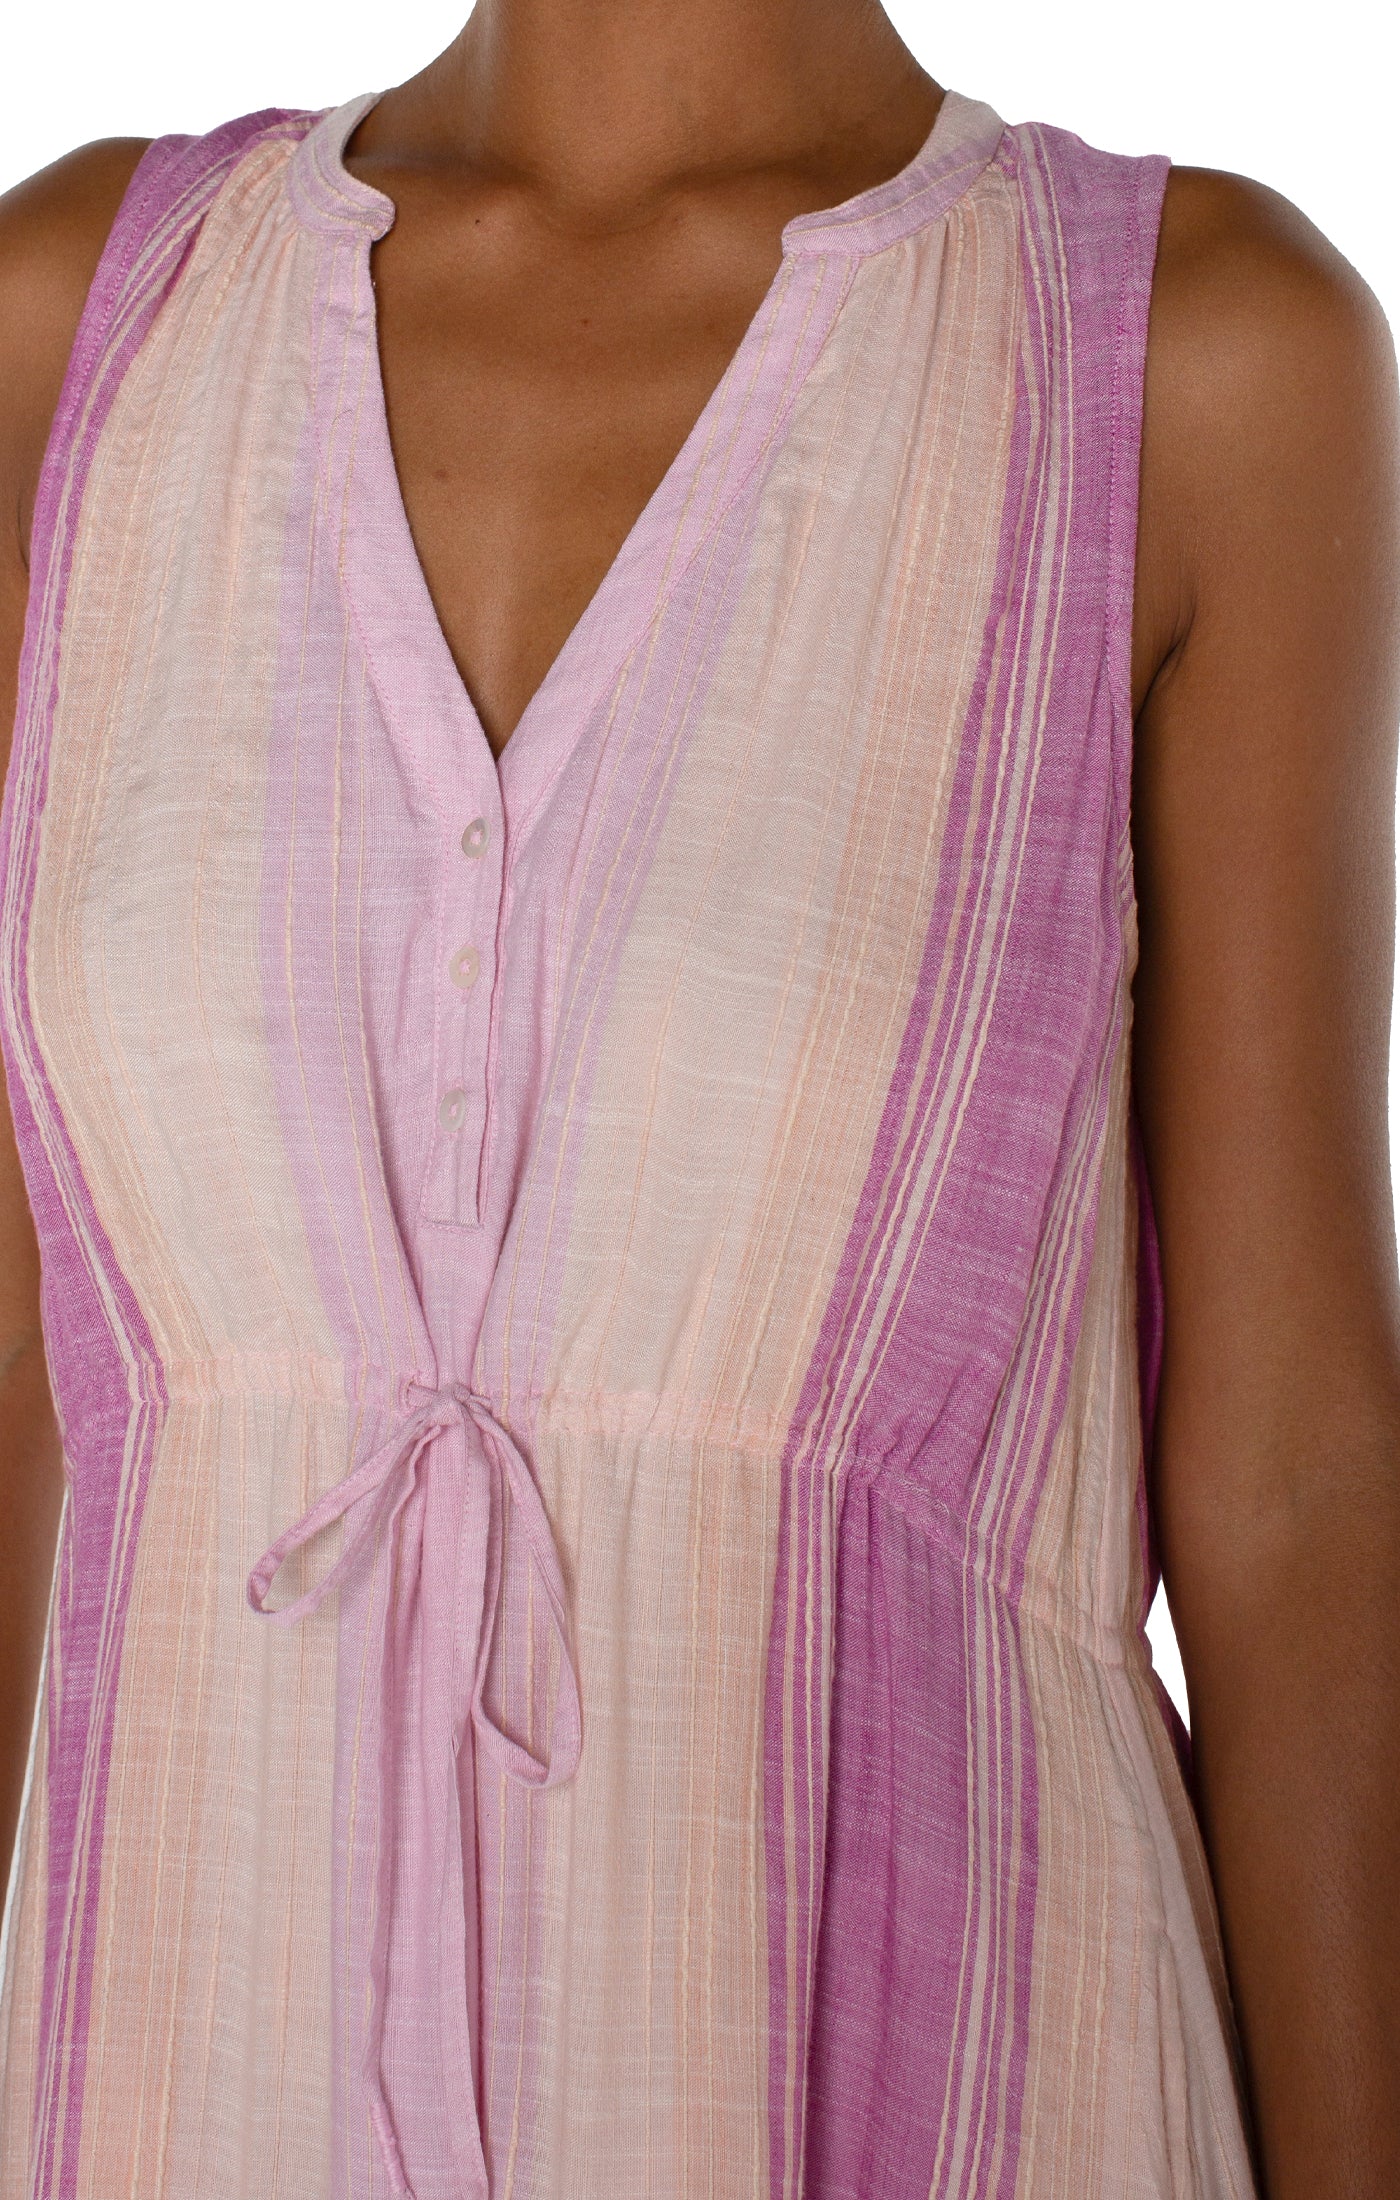 LVP Slvless Tiered Maxi Dress - Lavender Close Up View